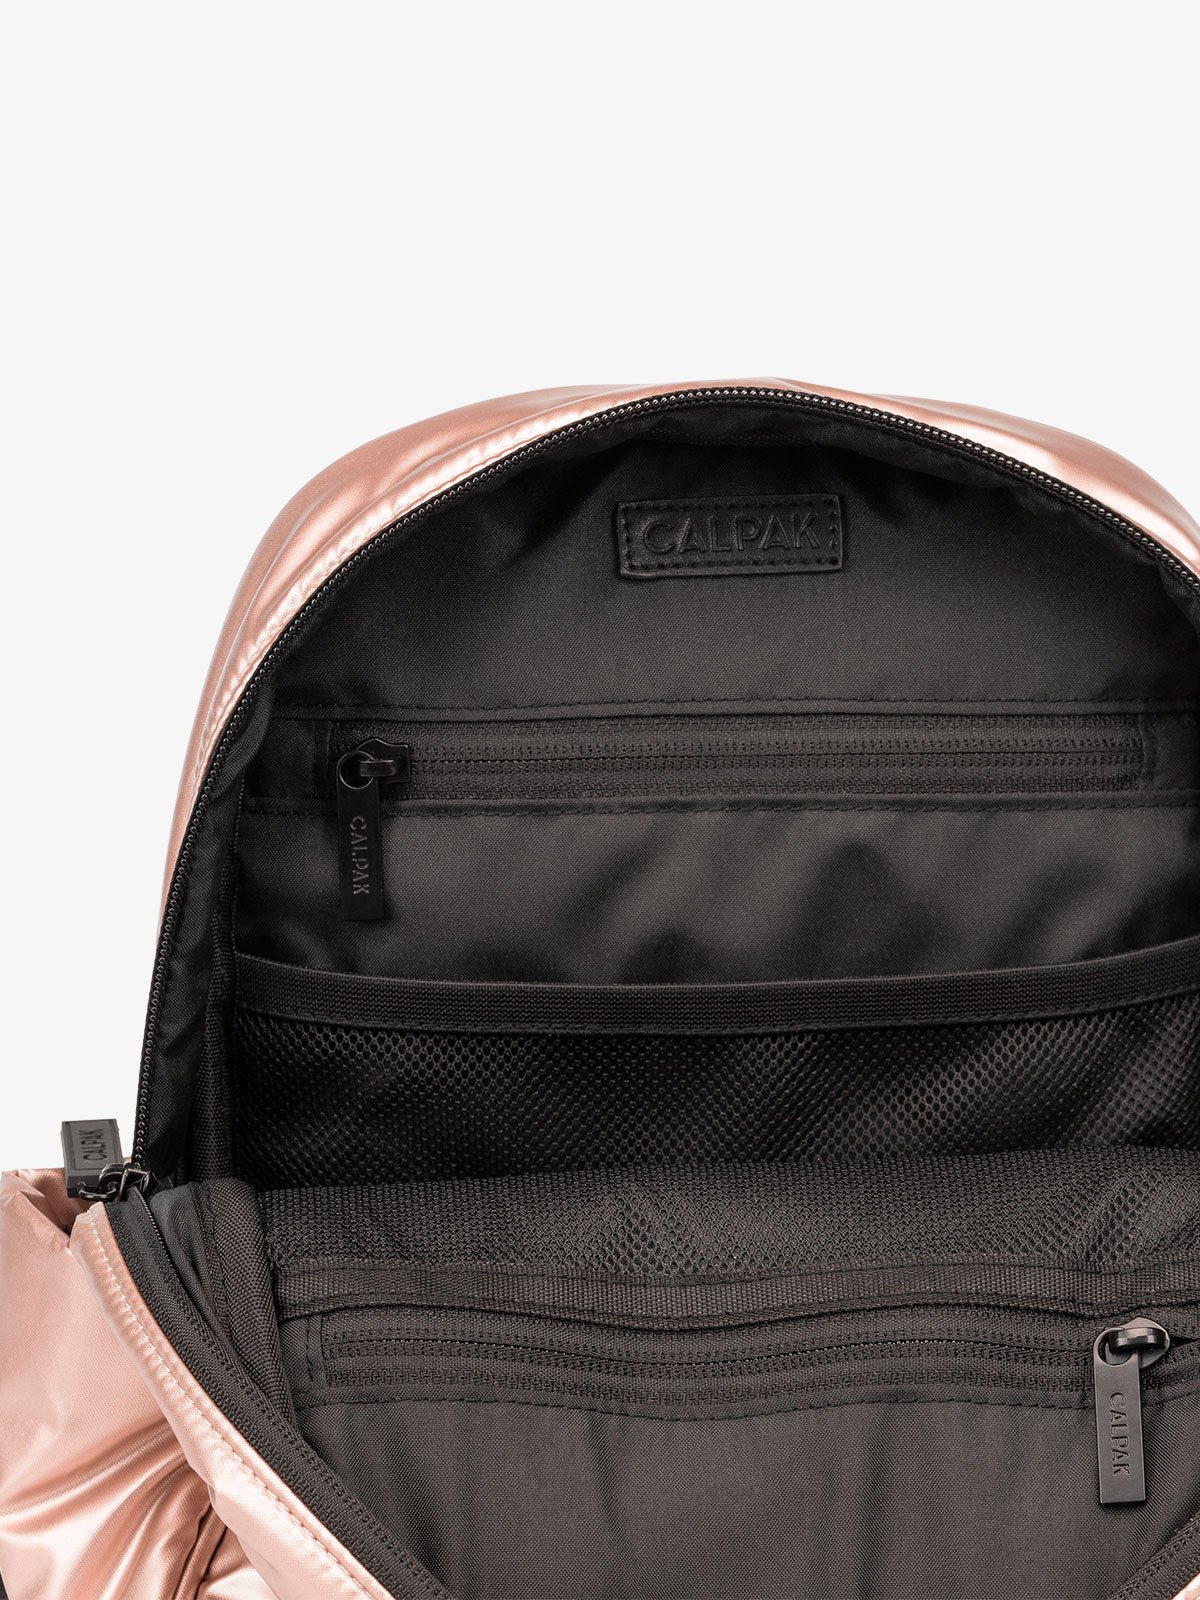 CALPAK Luka Mini travel Backpack with water resistant interior lining and multiple pockets in pink rose gold